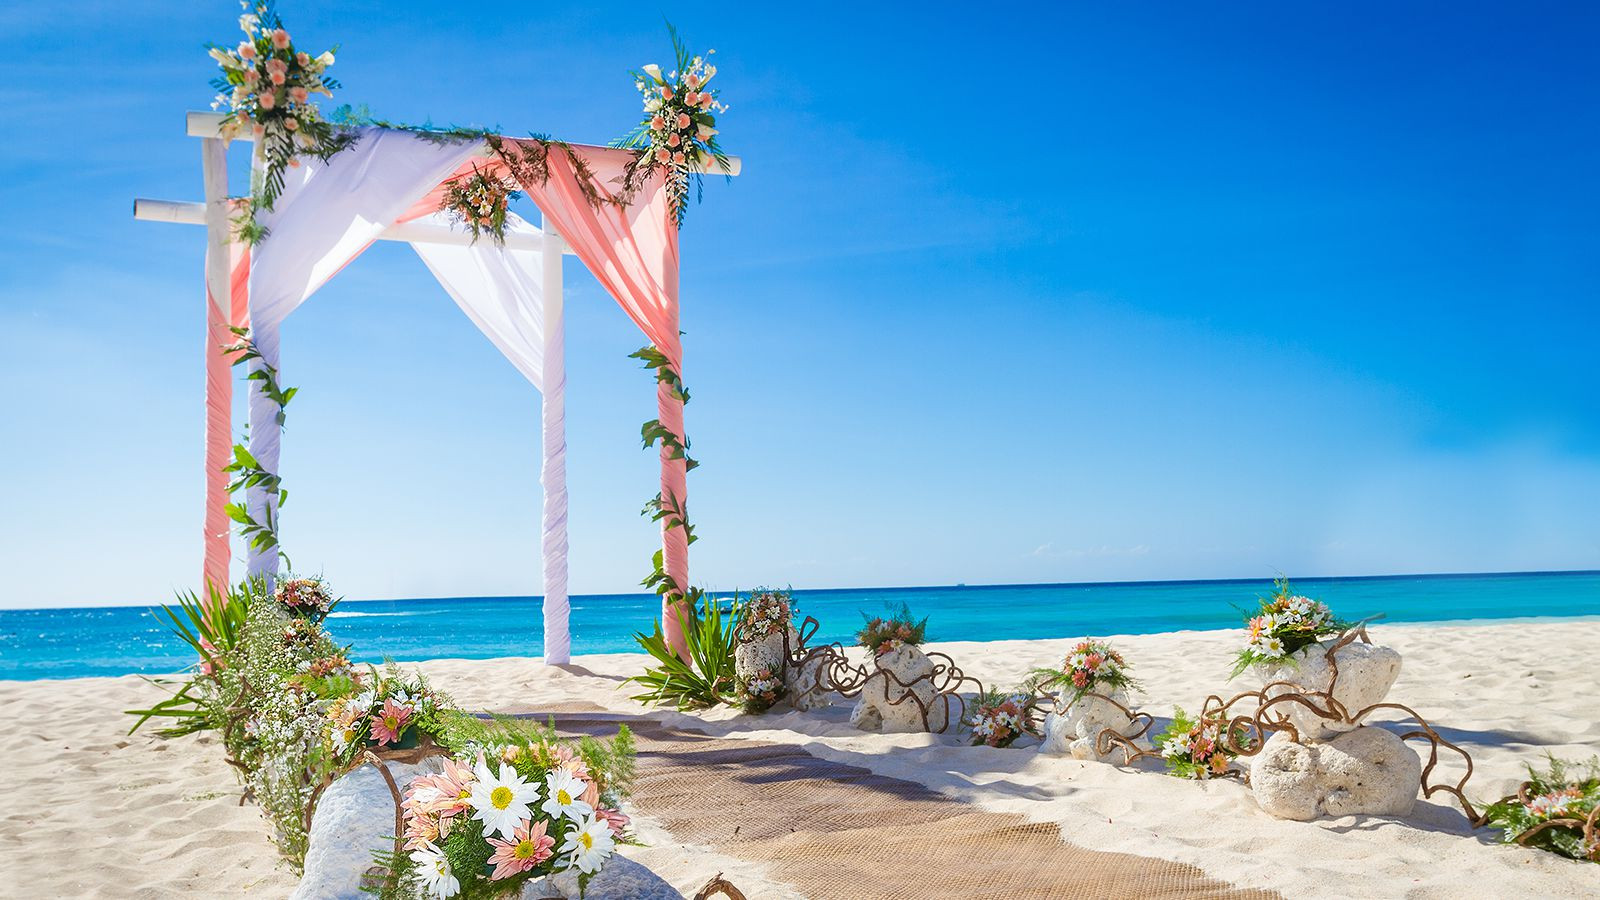 Wedding On Beach
 5 Low Cost Ways to Decorate for Your Beach Wedding